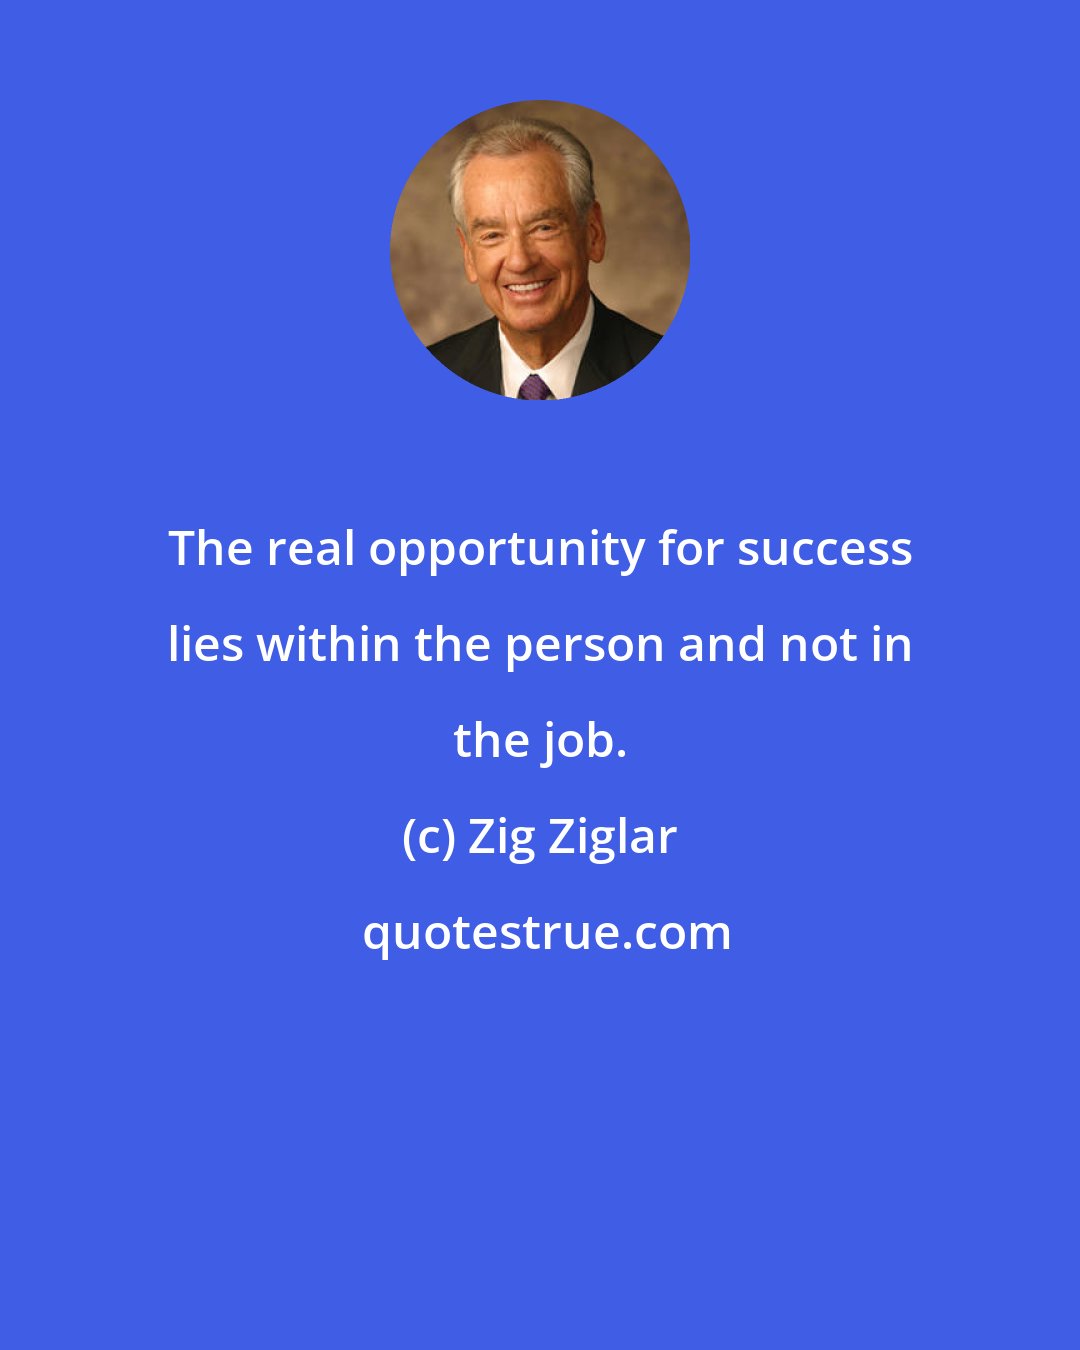 Zig Ziglar: The real opportunity for success lies within the person and not in the job.